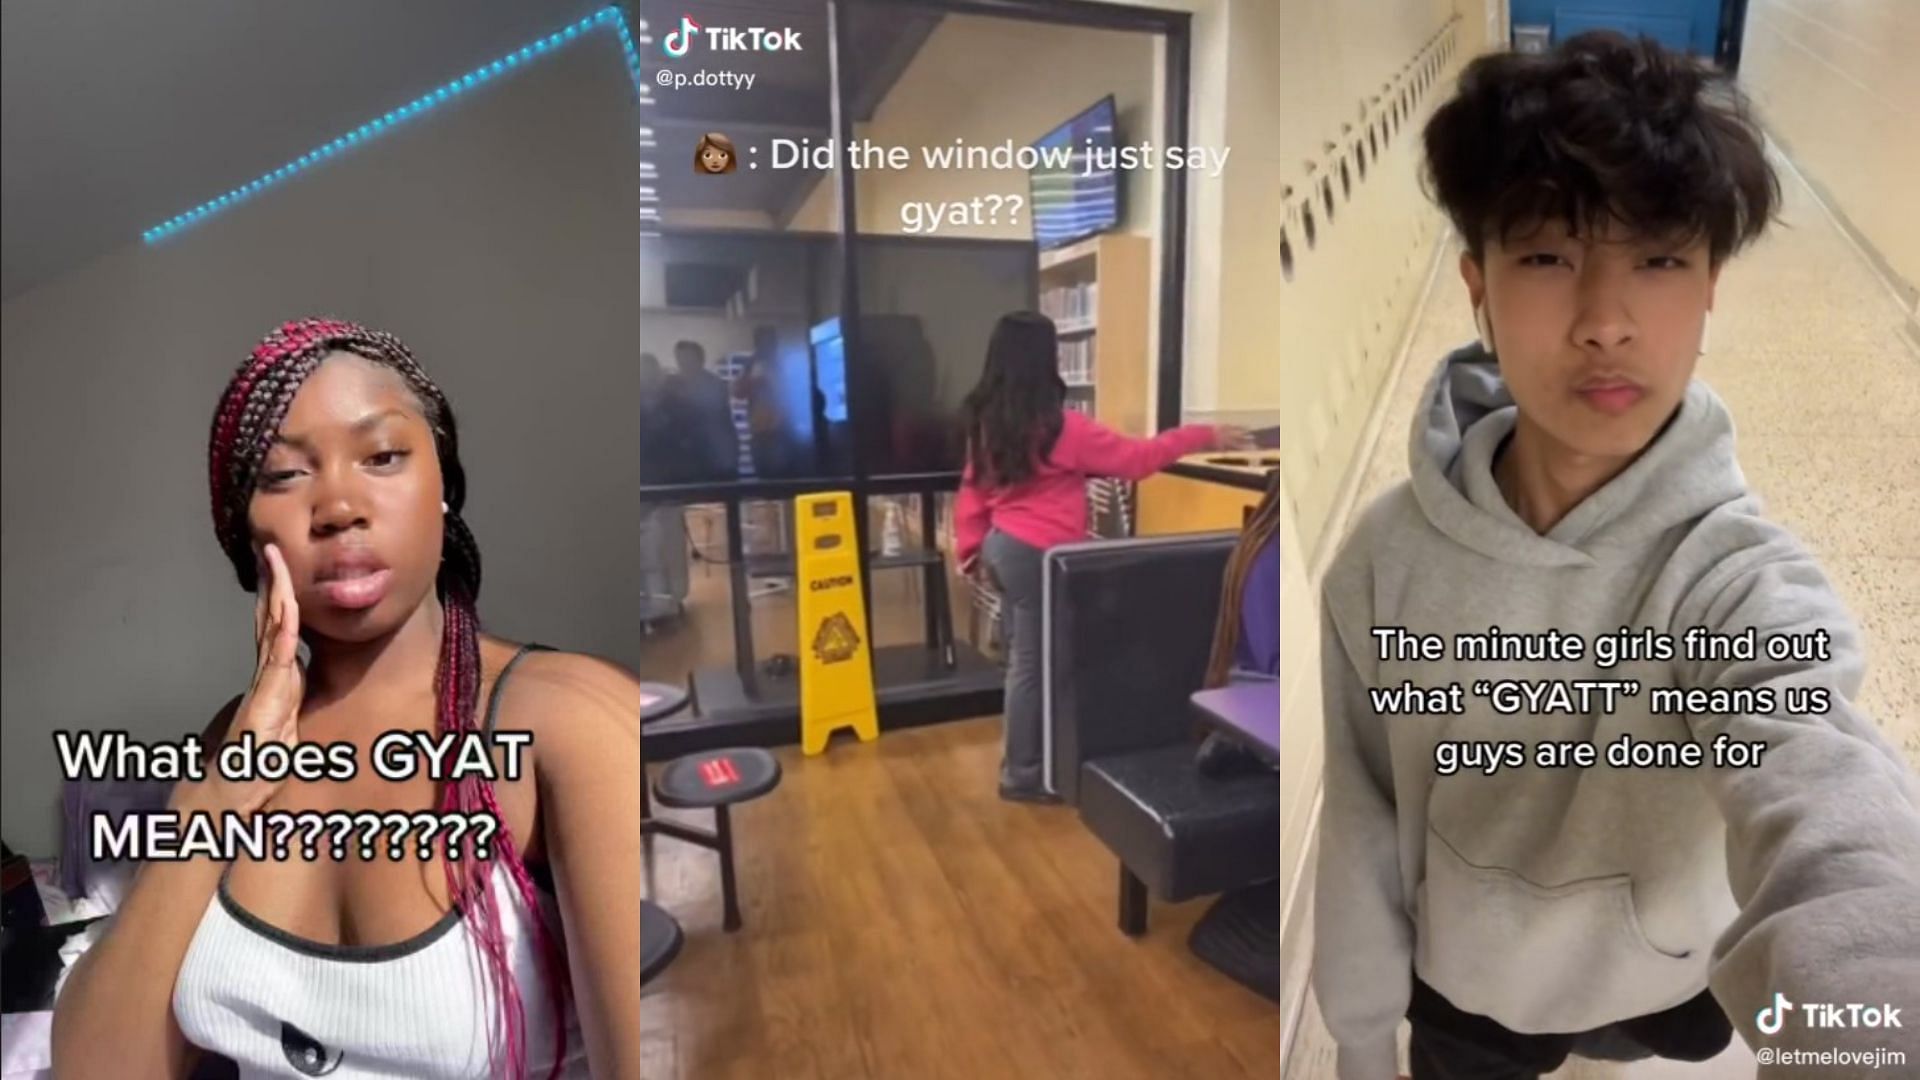 Many TikTok users are confused about the meaning of the internet slang &#039;GYAT&#039; that has been all over the platform (Images via TikTok/ h3art8roken101, p.dottyy, and letmelovejim)